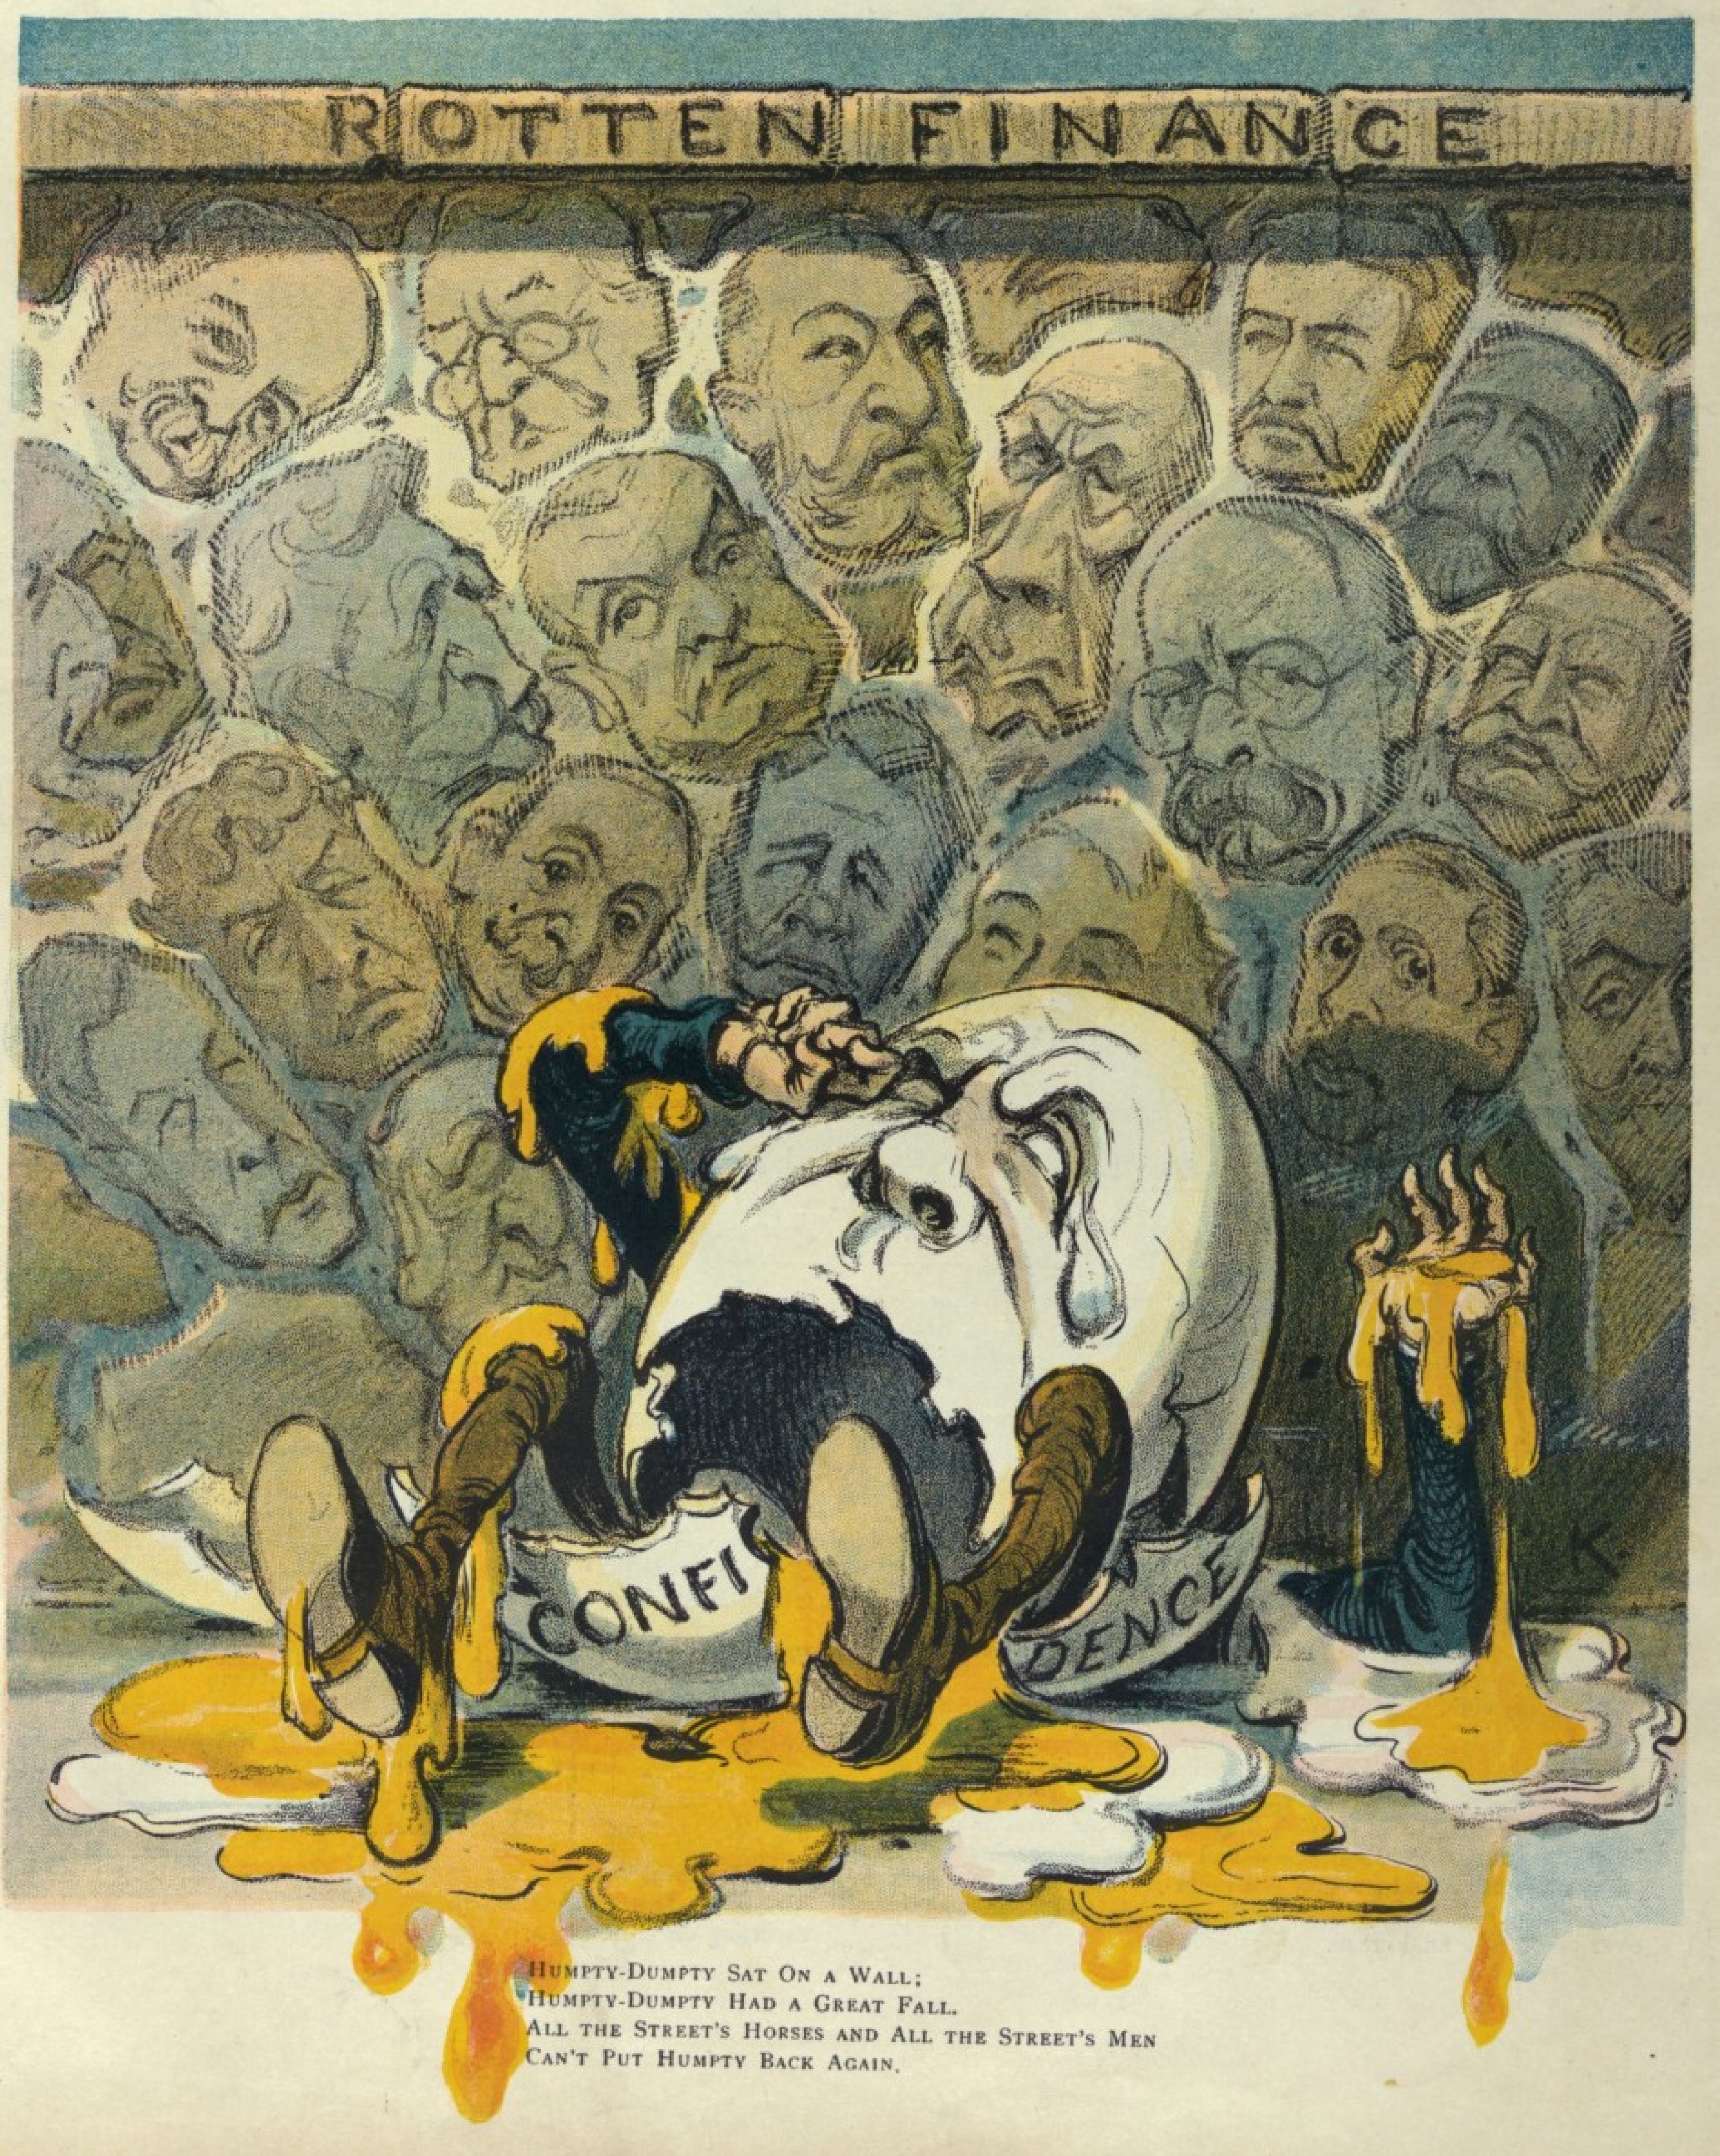 1907 Puck magazine cover image uses a Humpty Dumpty reference to illustrate the state of financial capitalism. A wall of quotRotten Financequot formed by figures like John D. Rockefeller, J. Pierpont Morgan and Edward H. Harriman has failed to prop up